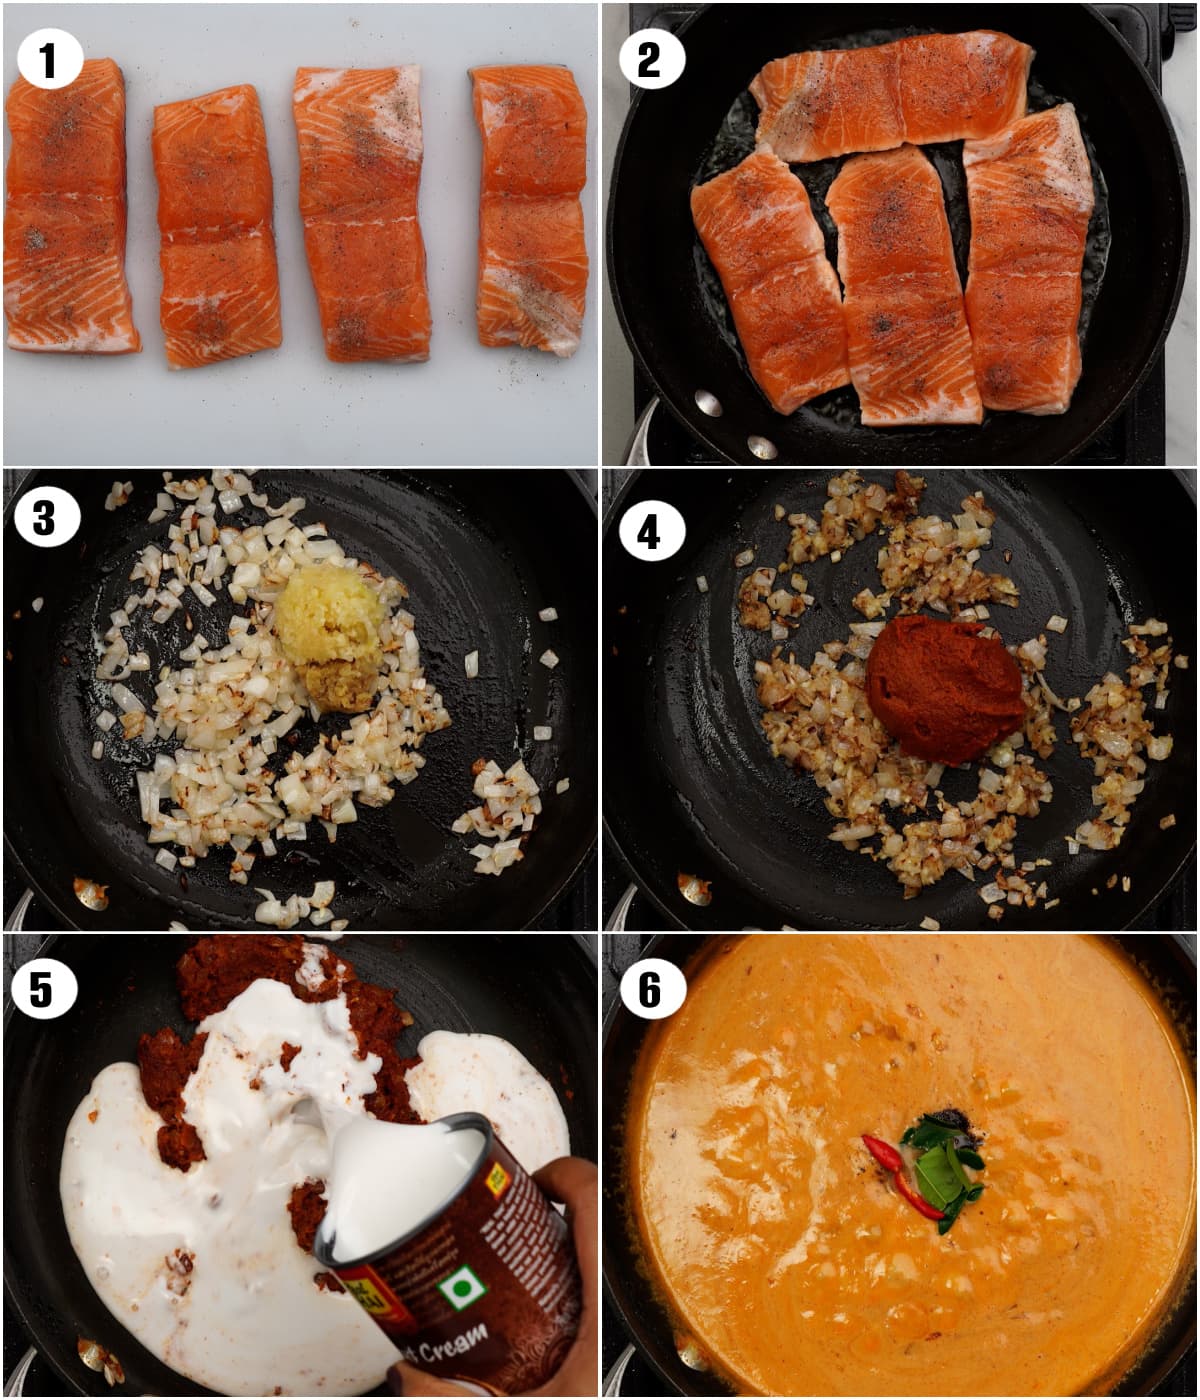 Collage fo six images shows steps to make Salmon coconut curry - 1. Season salmon. 2. Sear salmon fillets. 3. Saute aromatics. 4. Add thai curry paste. 5. Add coconut milk. 6. Add spices to gravy and stir. 